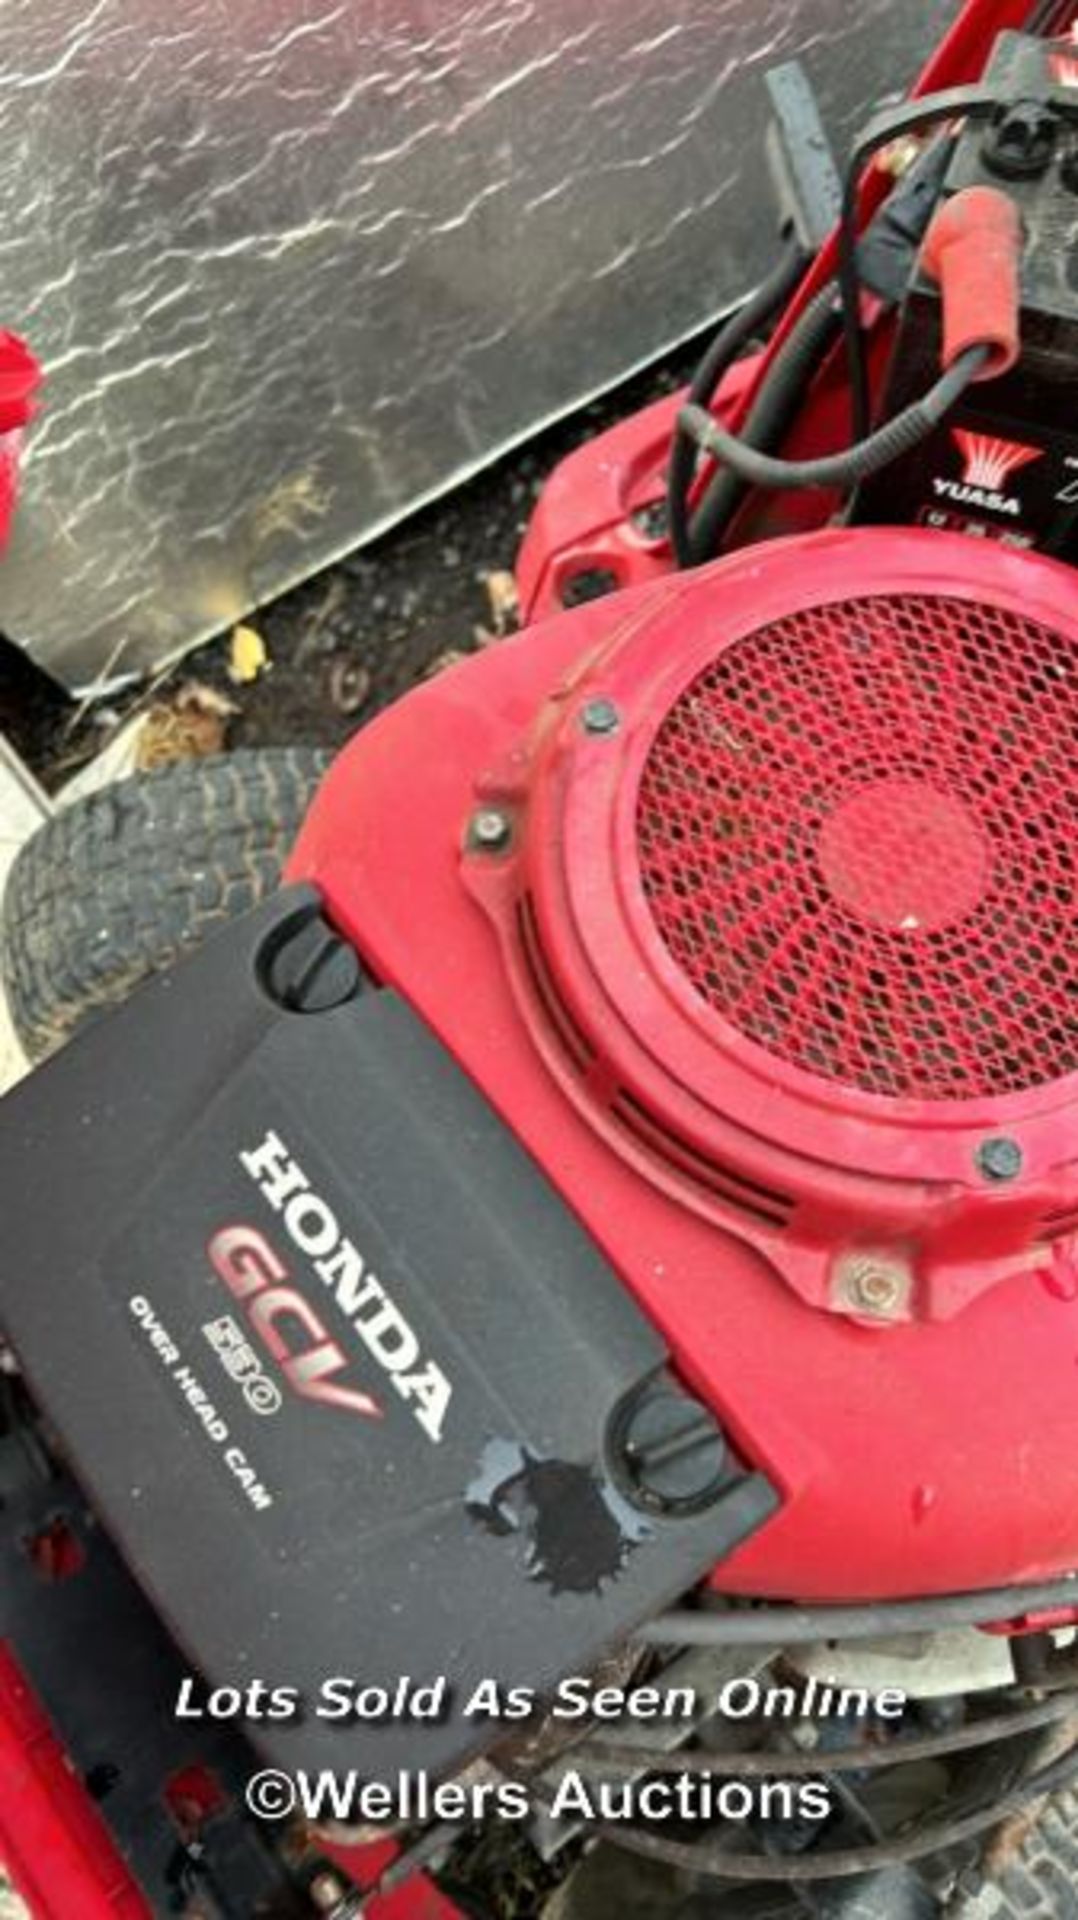 HONDA 2417 V-TWIN HYDRO STATIC RIDE ON MOWER, GOOD RUNNER, WITH KEY, RECENTLY SERVICED - Image 4 of 5